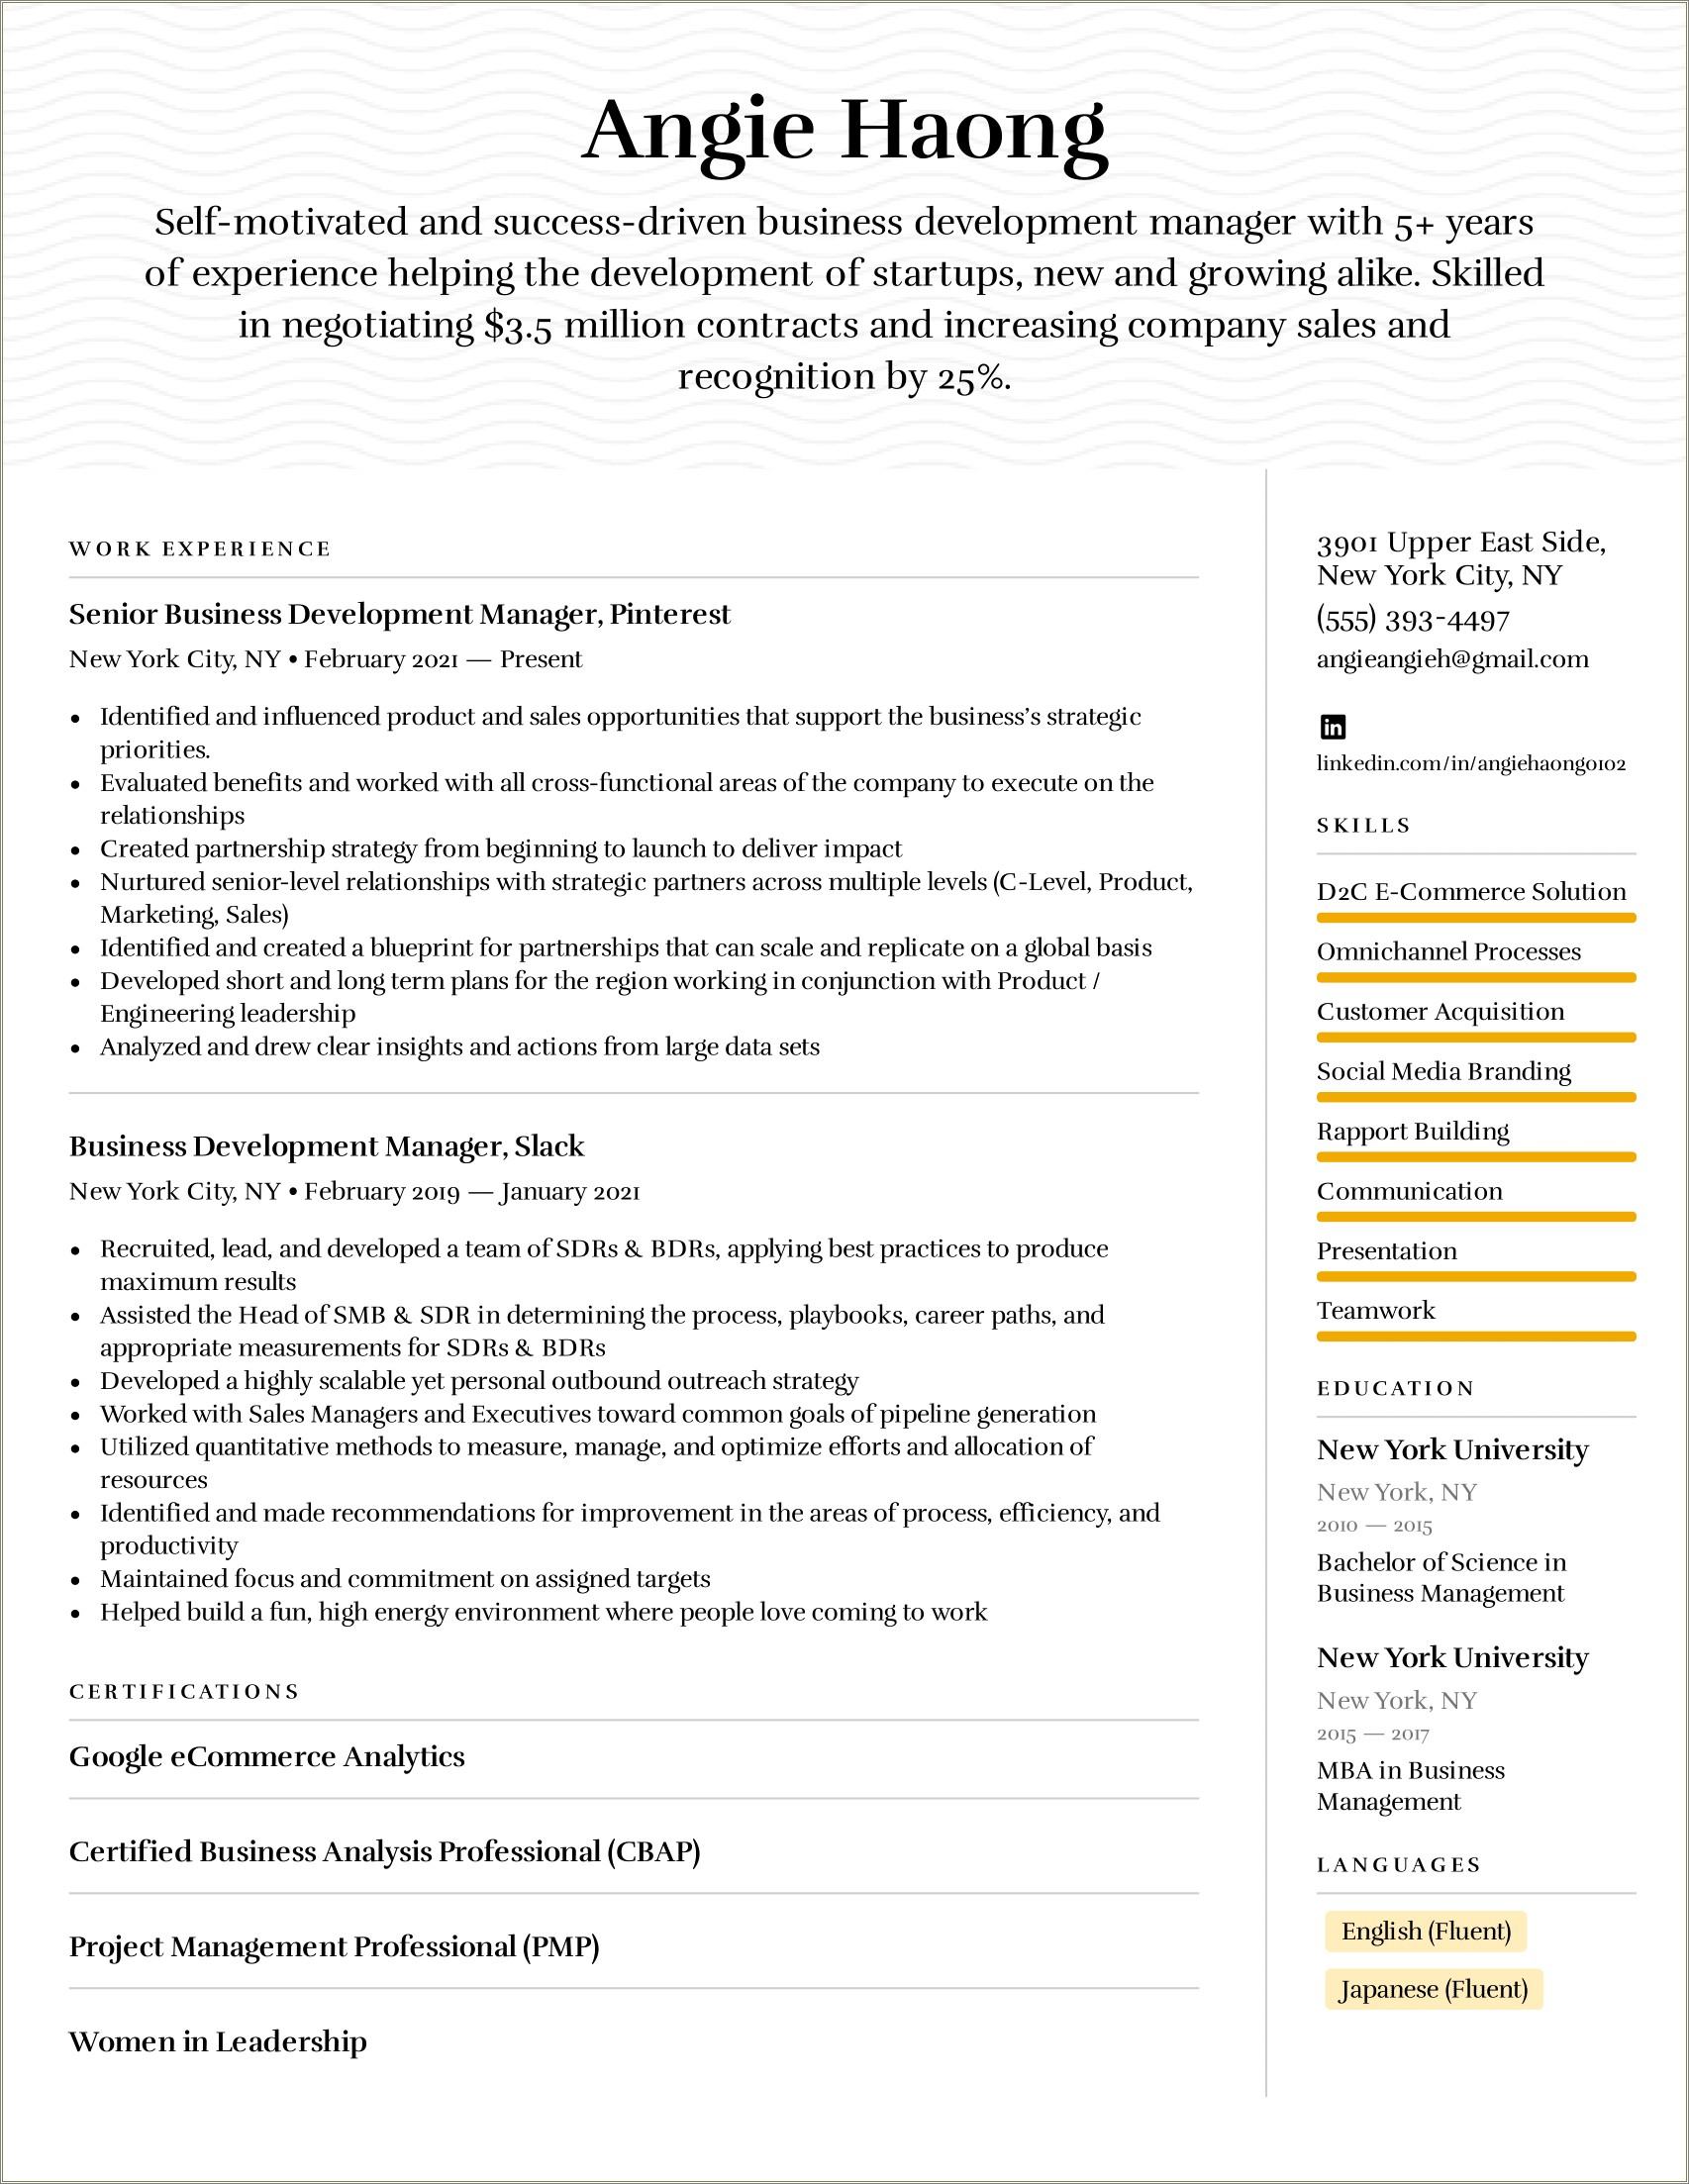 Job Resume Knowledgeable With Computers